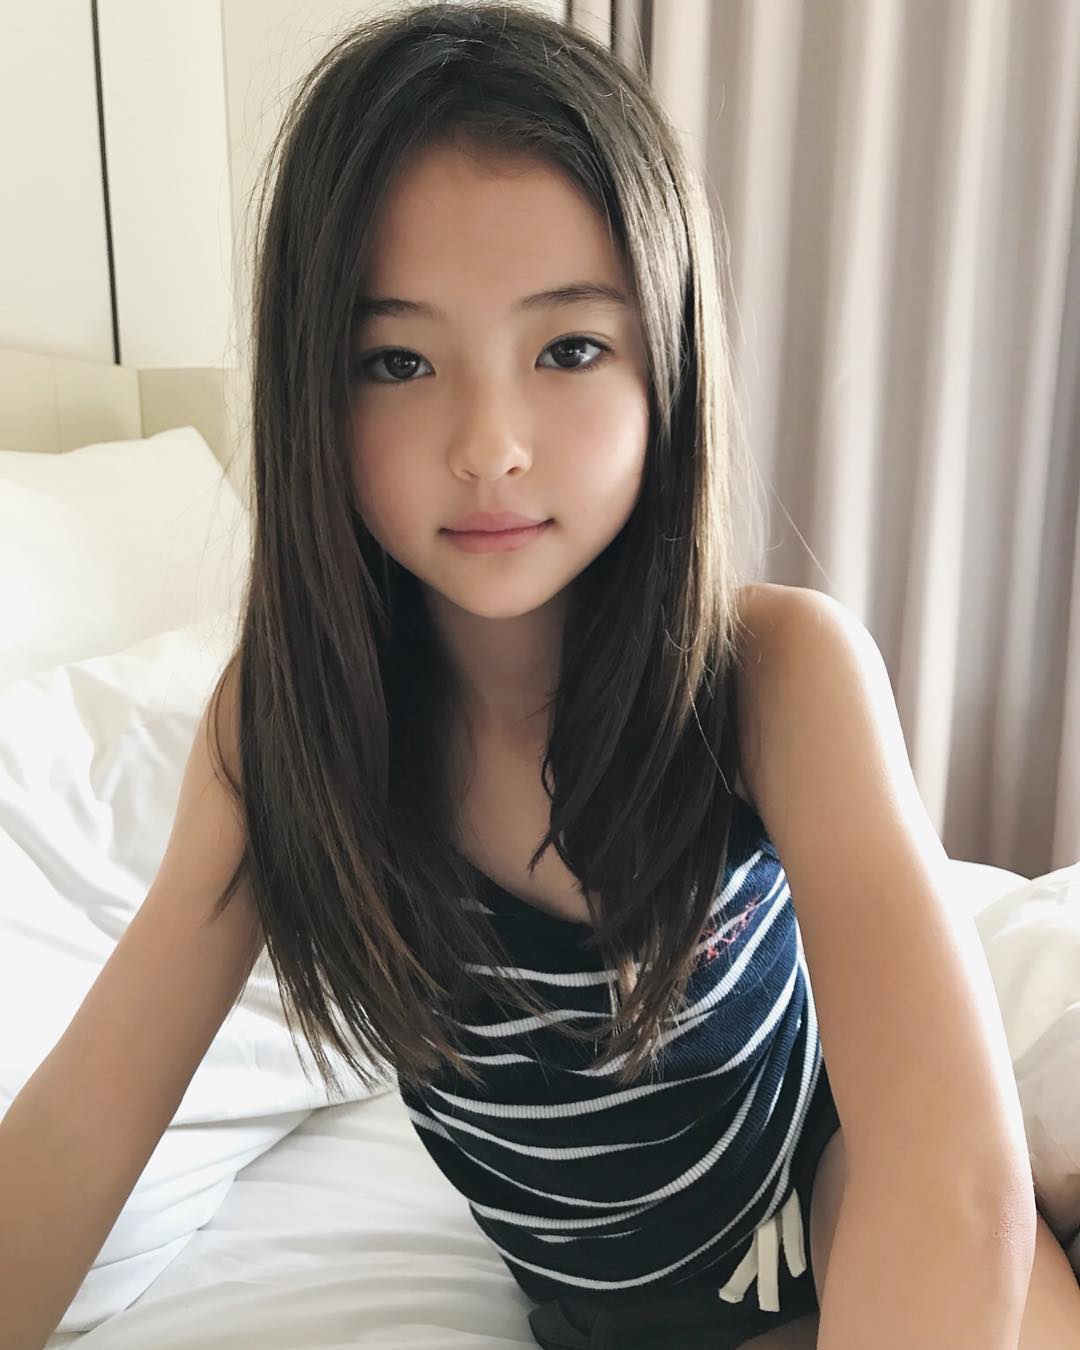 Youngest Looking Asian Teen